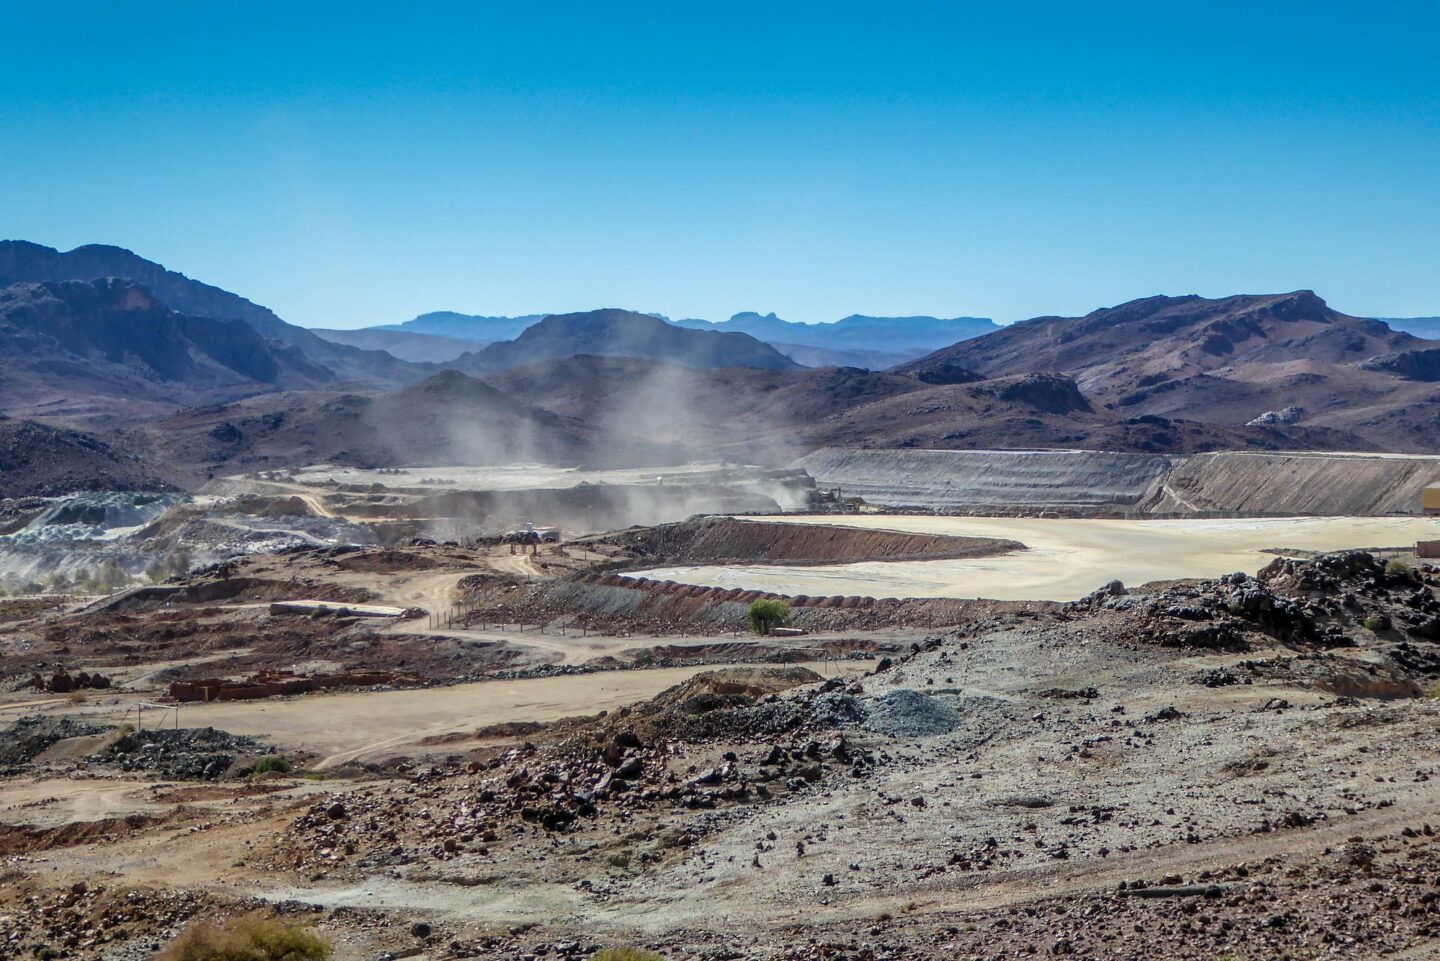 The Bou Azzer Cobalt Mine in Morocco.